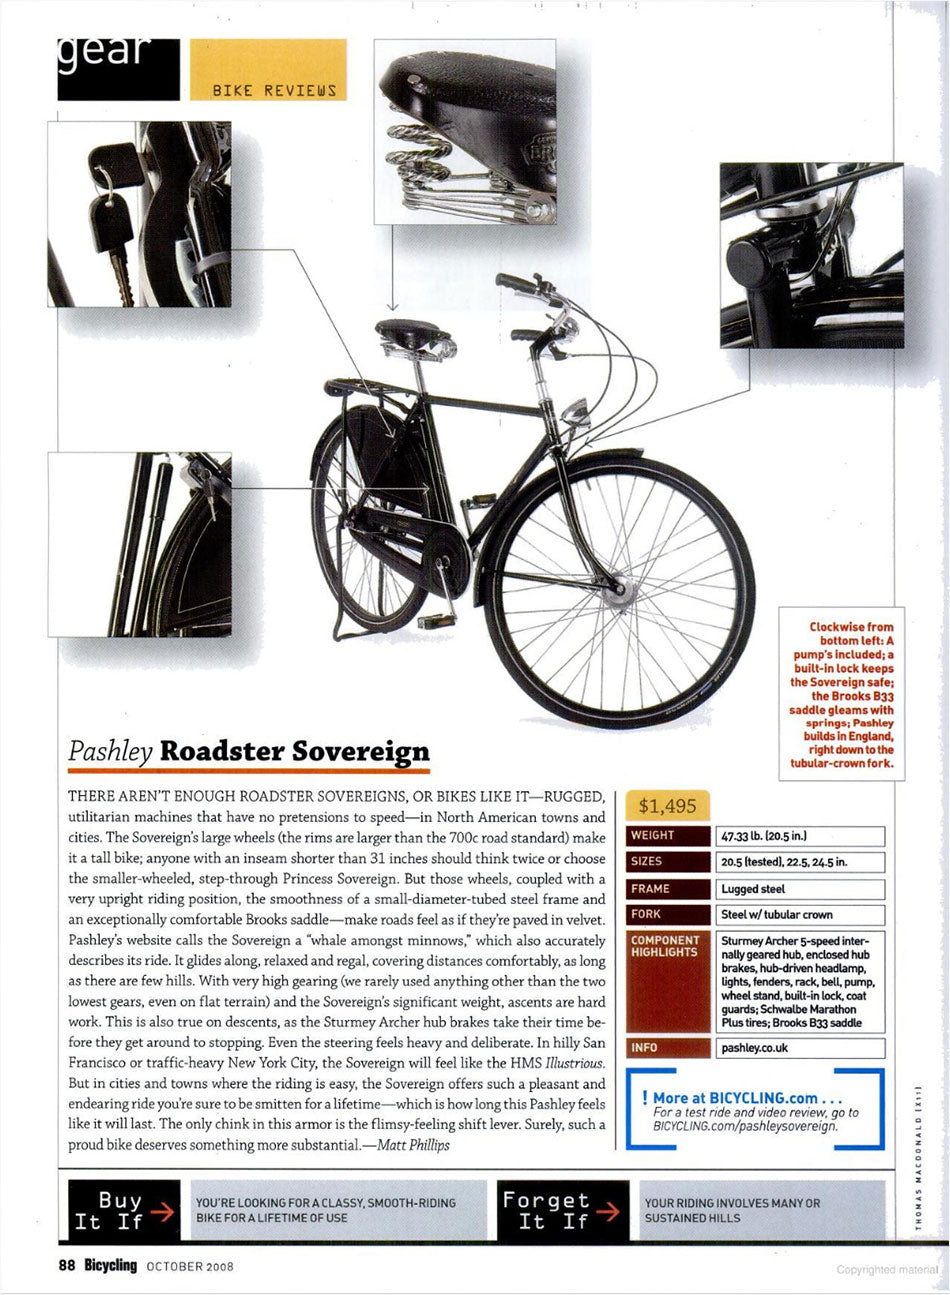 Magazine page from Bicycling magazine October 2008 edition reviewing the Pashley Roadster Sovereign.